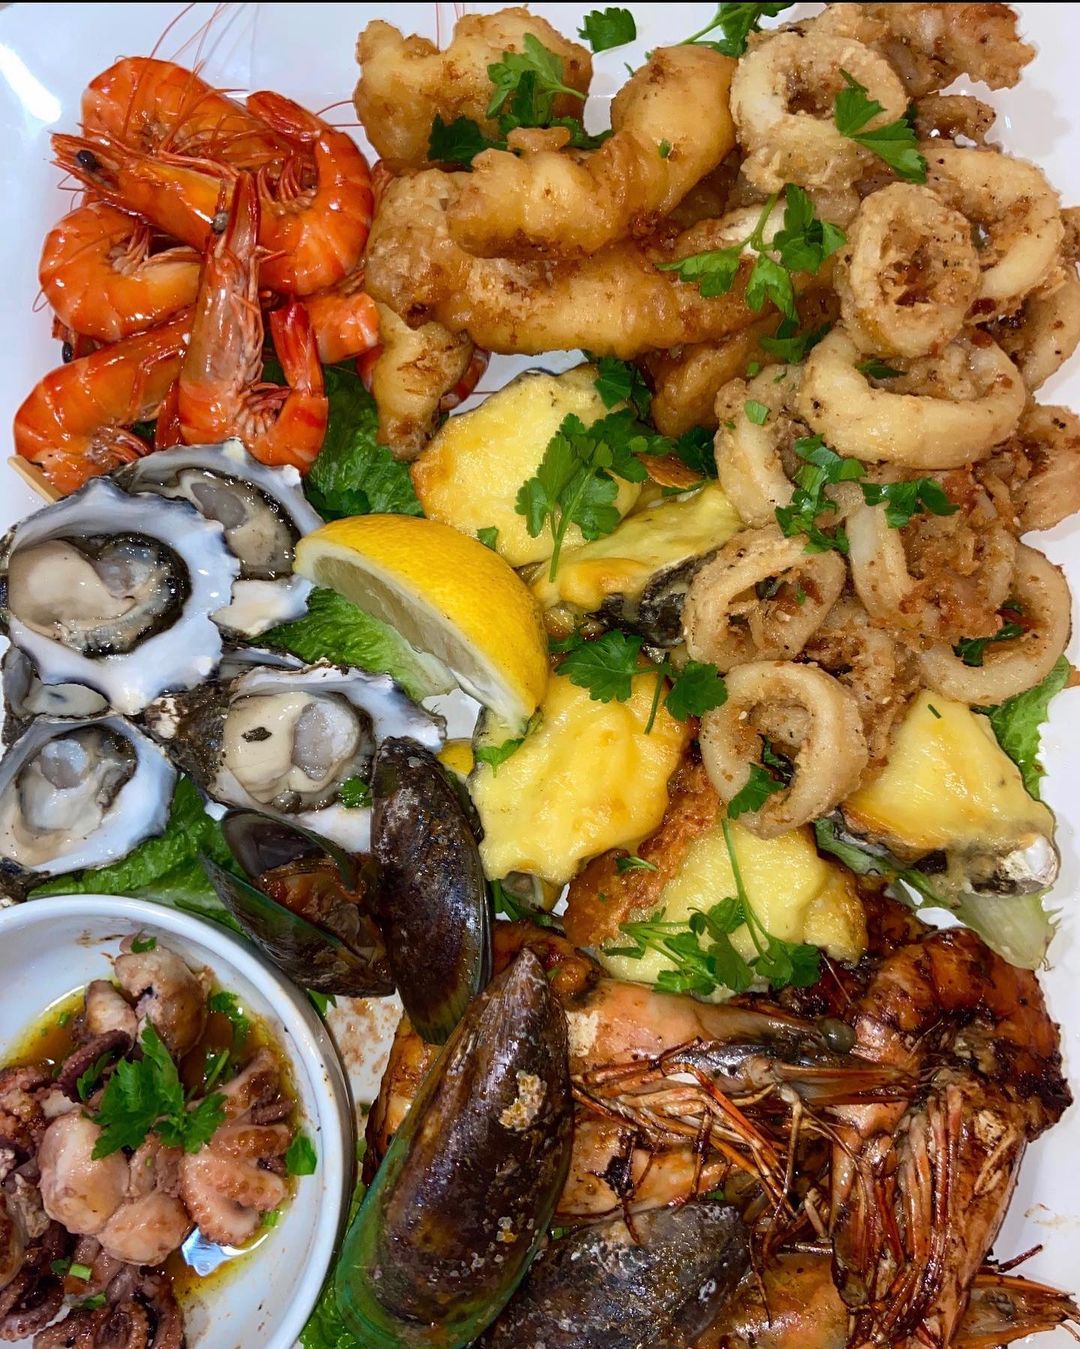 Loves a homemade Seafood Platter Happy Sunday